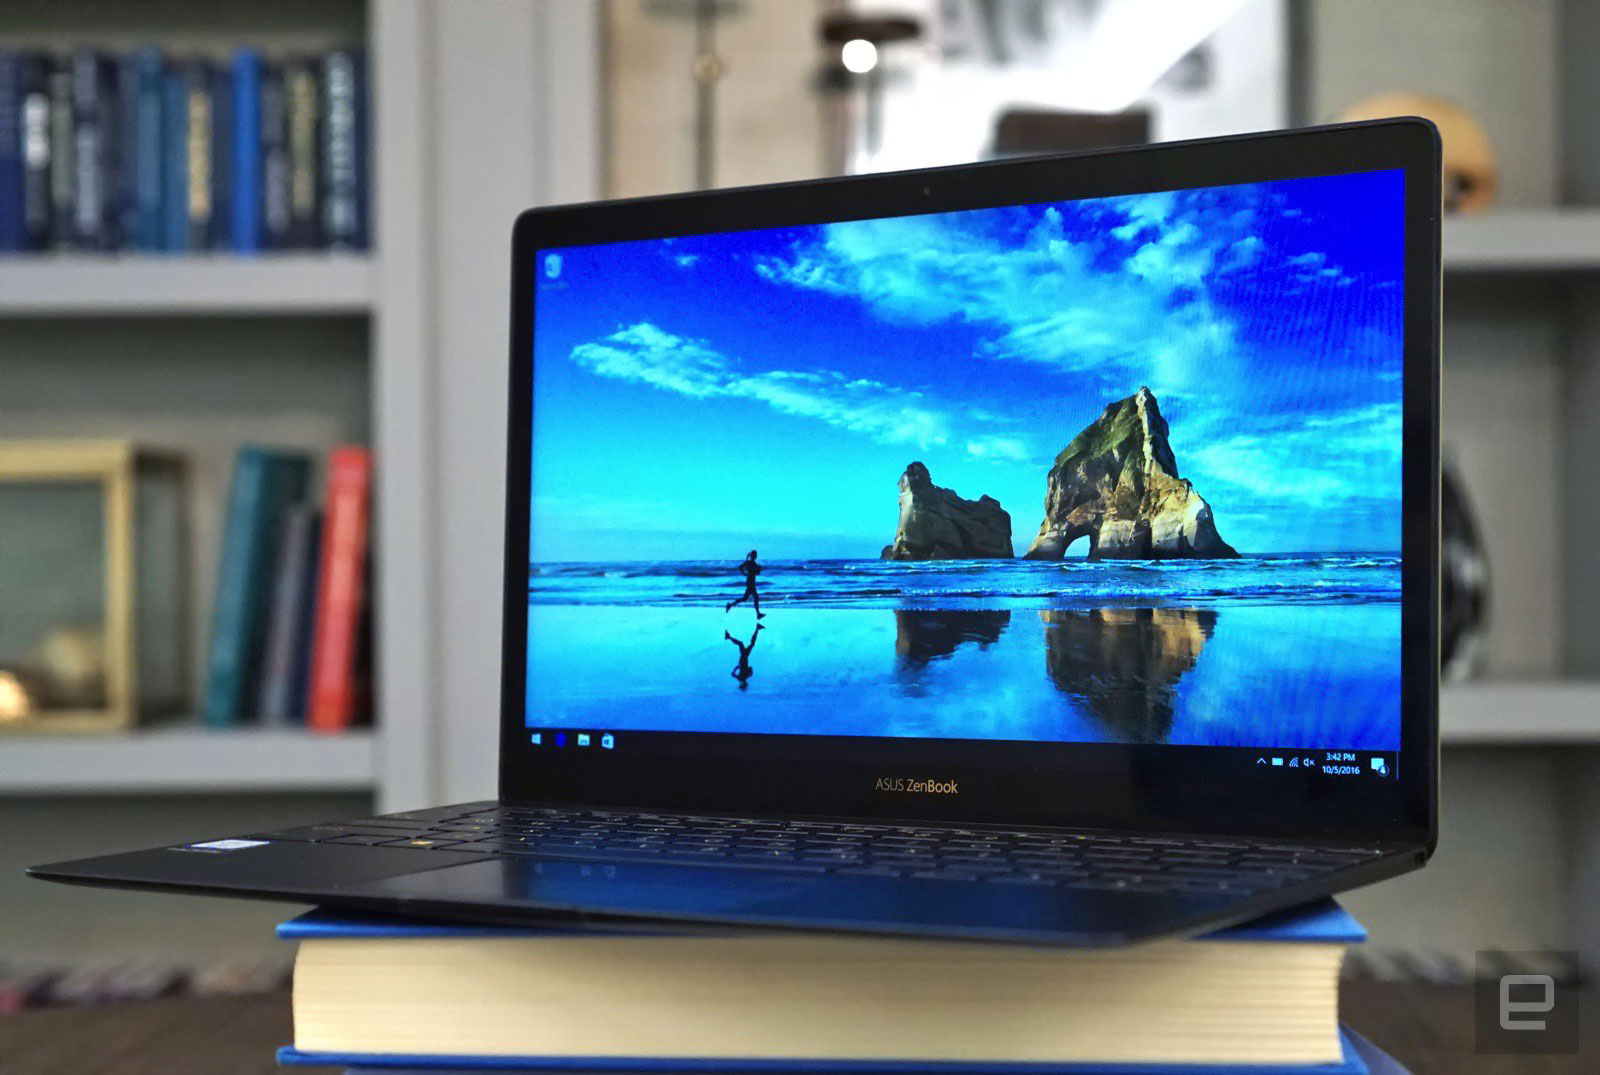 The bottom line: Our quick verdict on the ASUS ZenBook 3